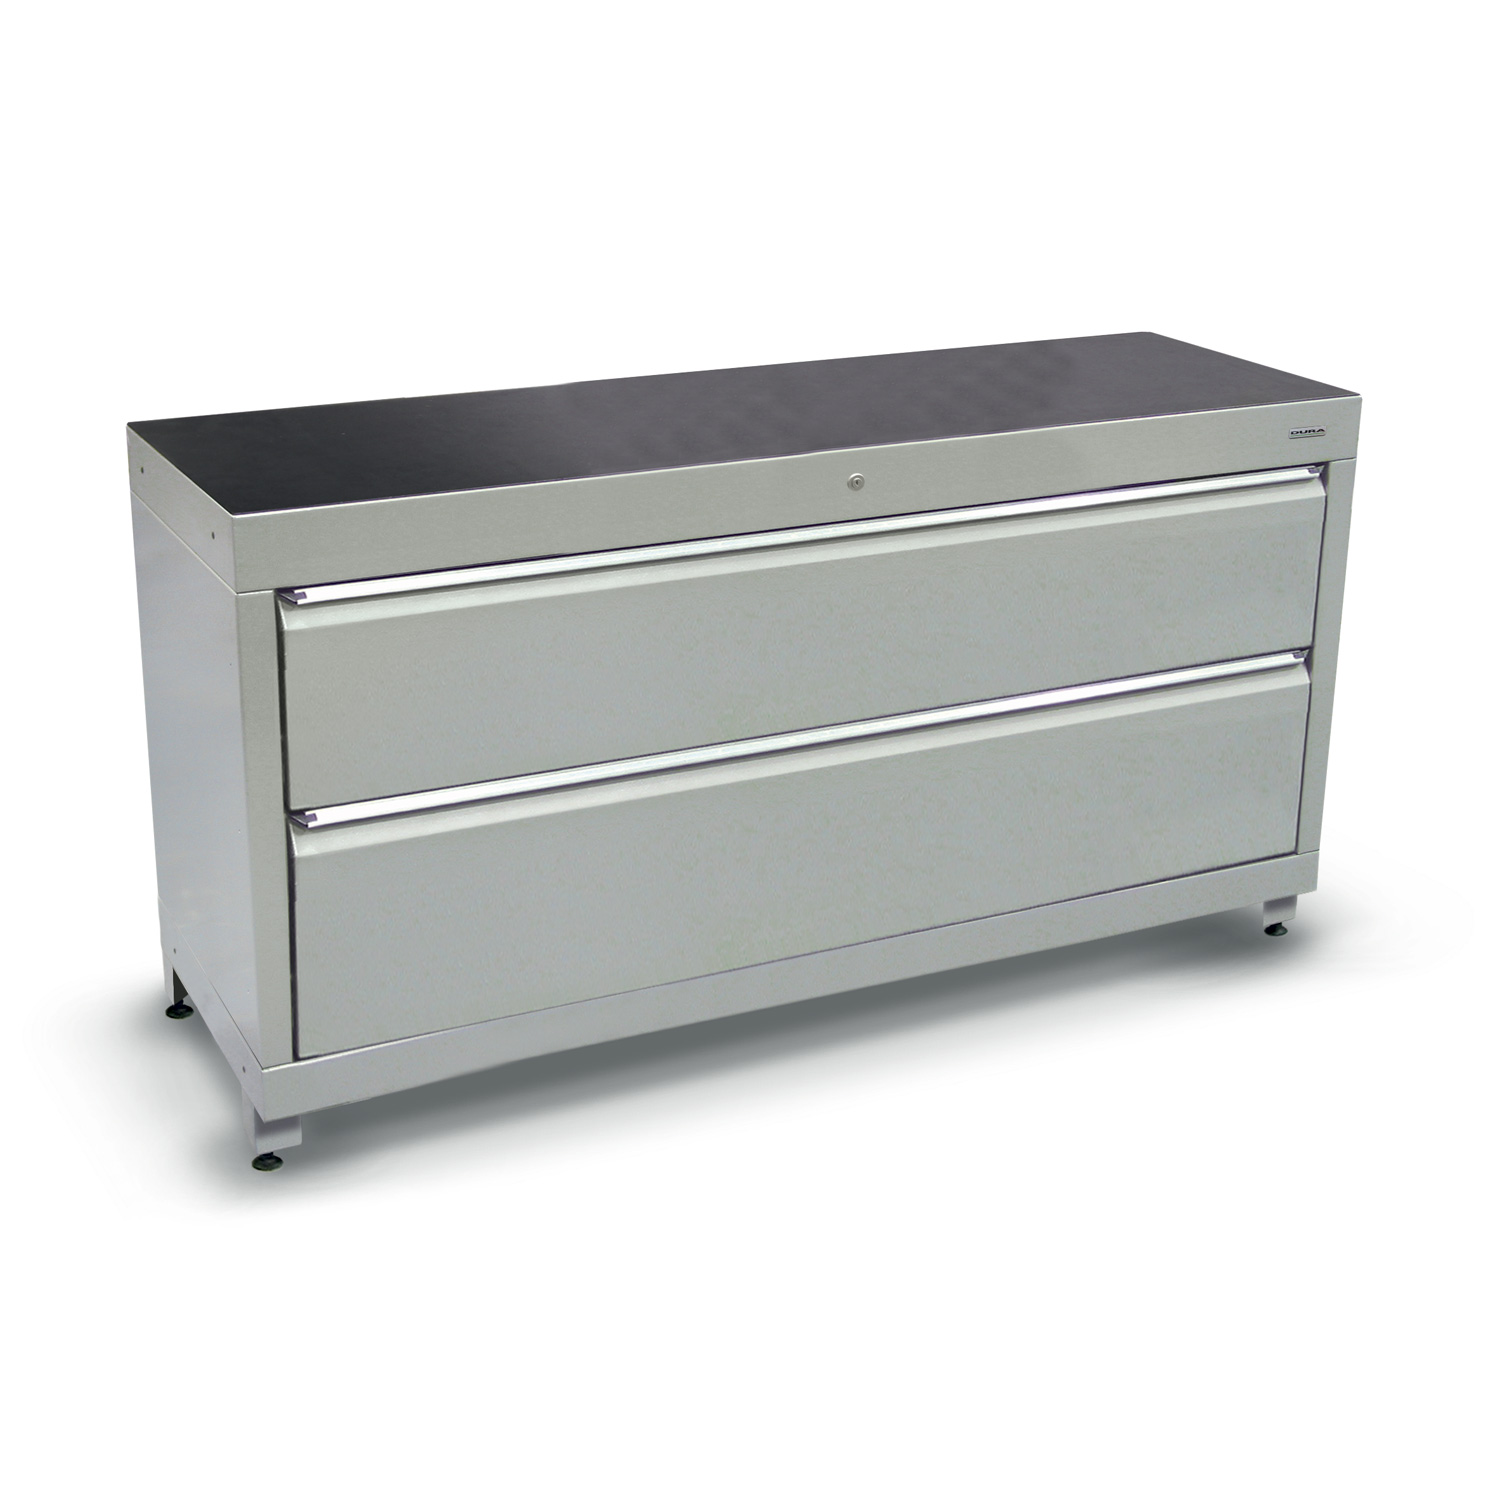 1800mm tool storage cabinet with 2 extra deep drawers